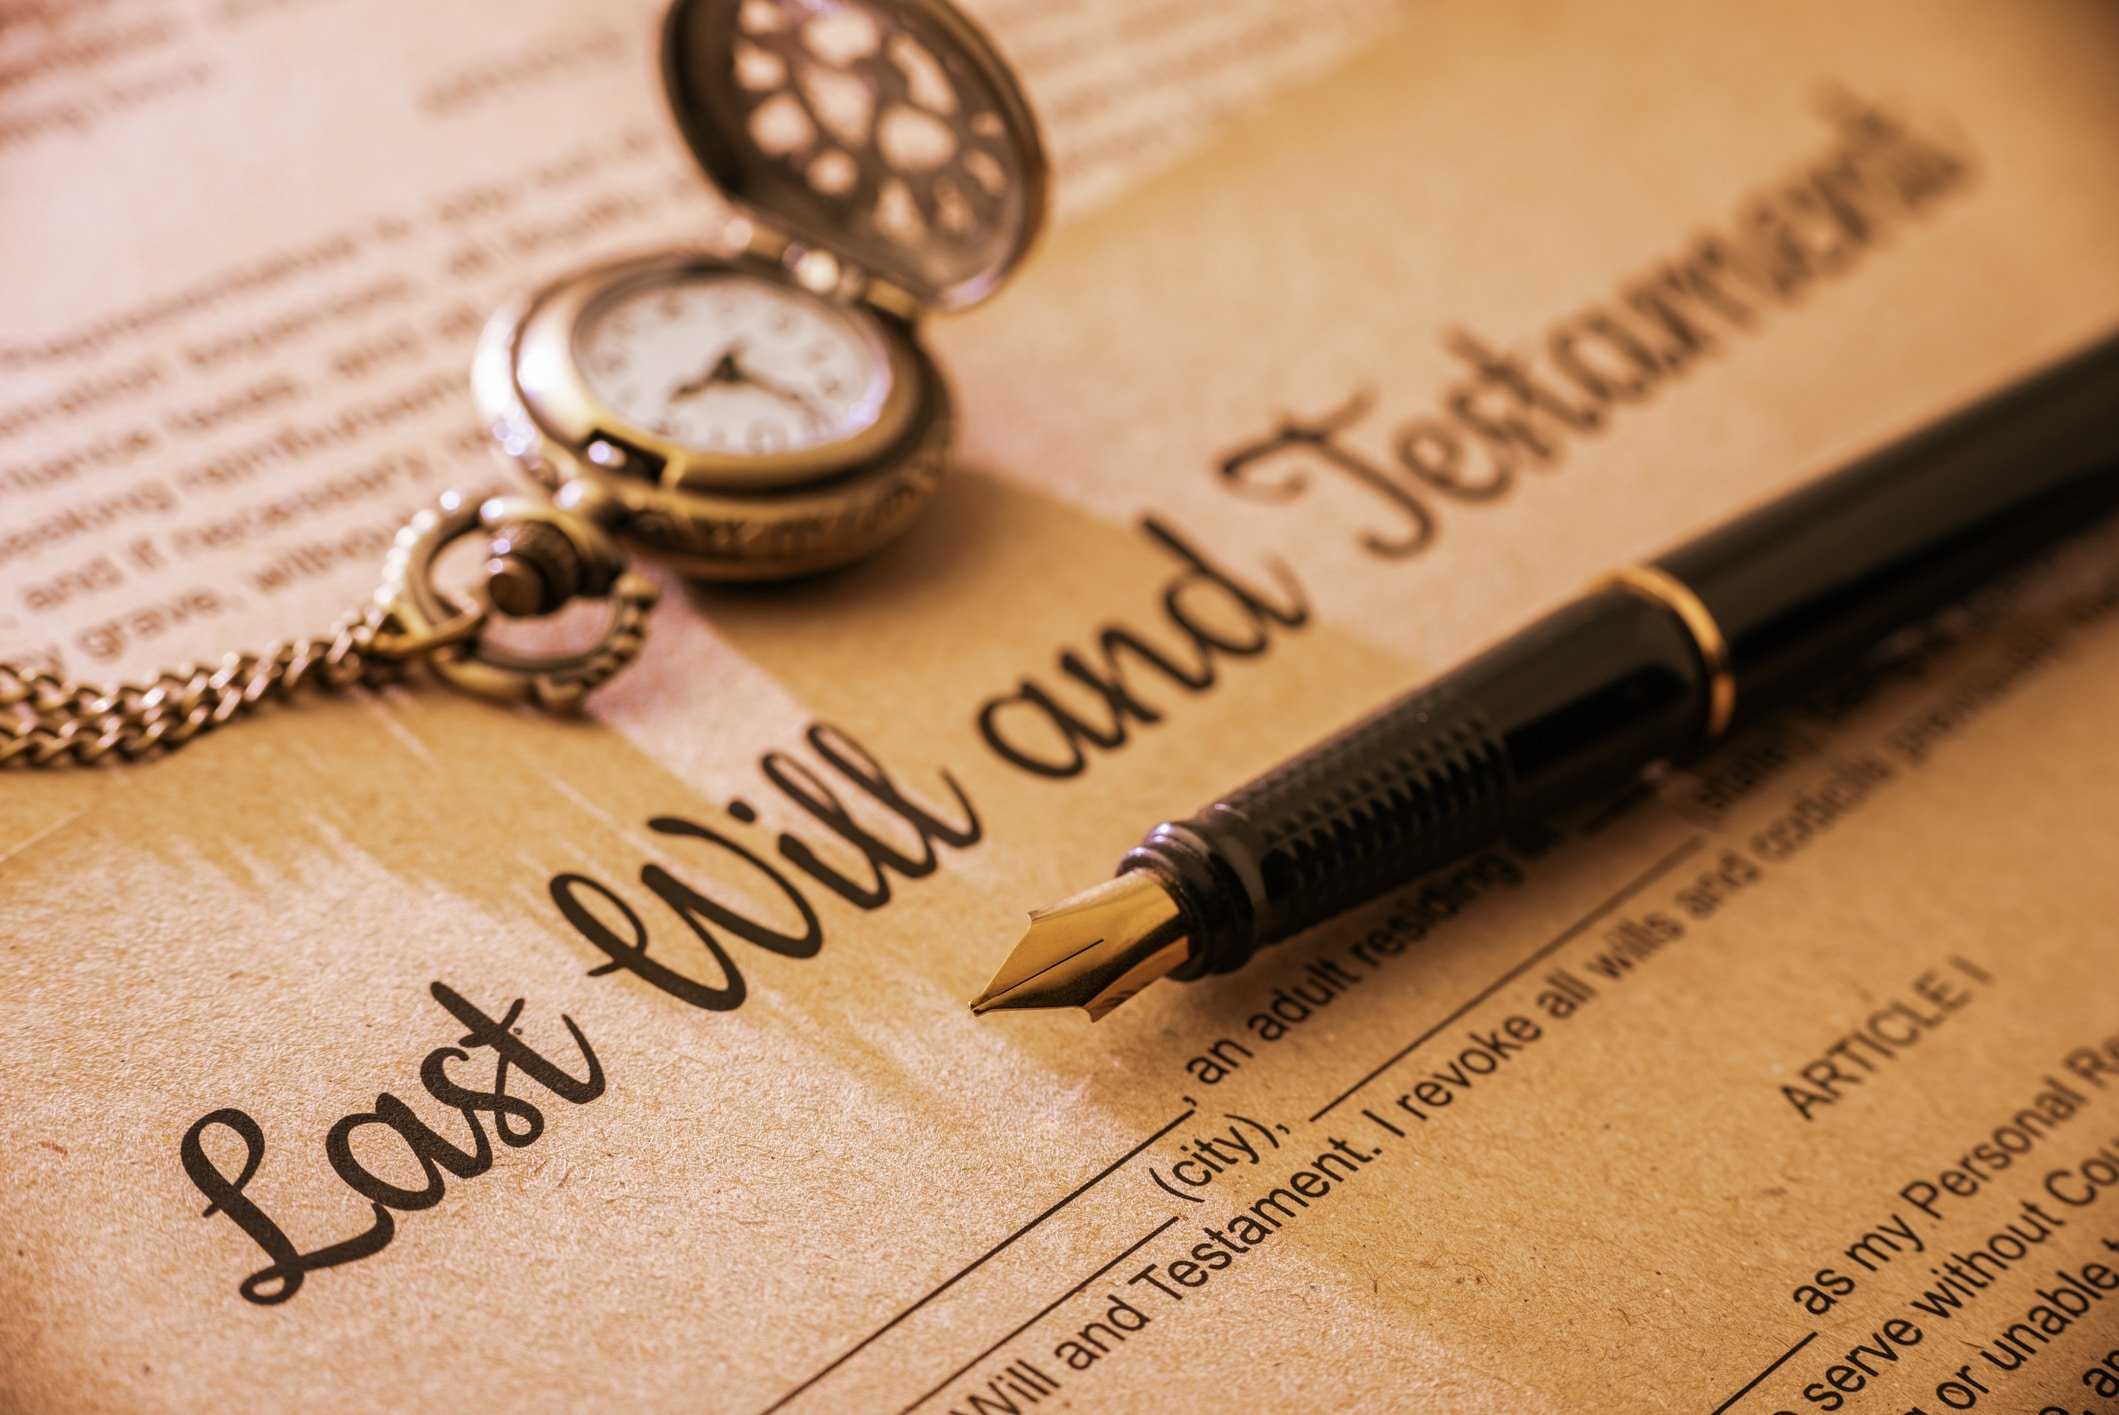 Who should I call to make a will in Tampa Florida